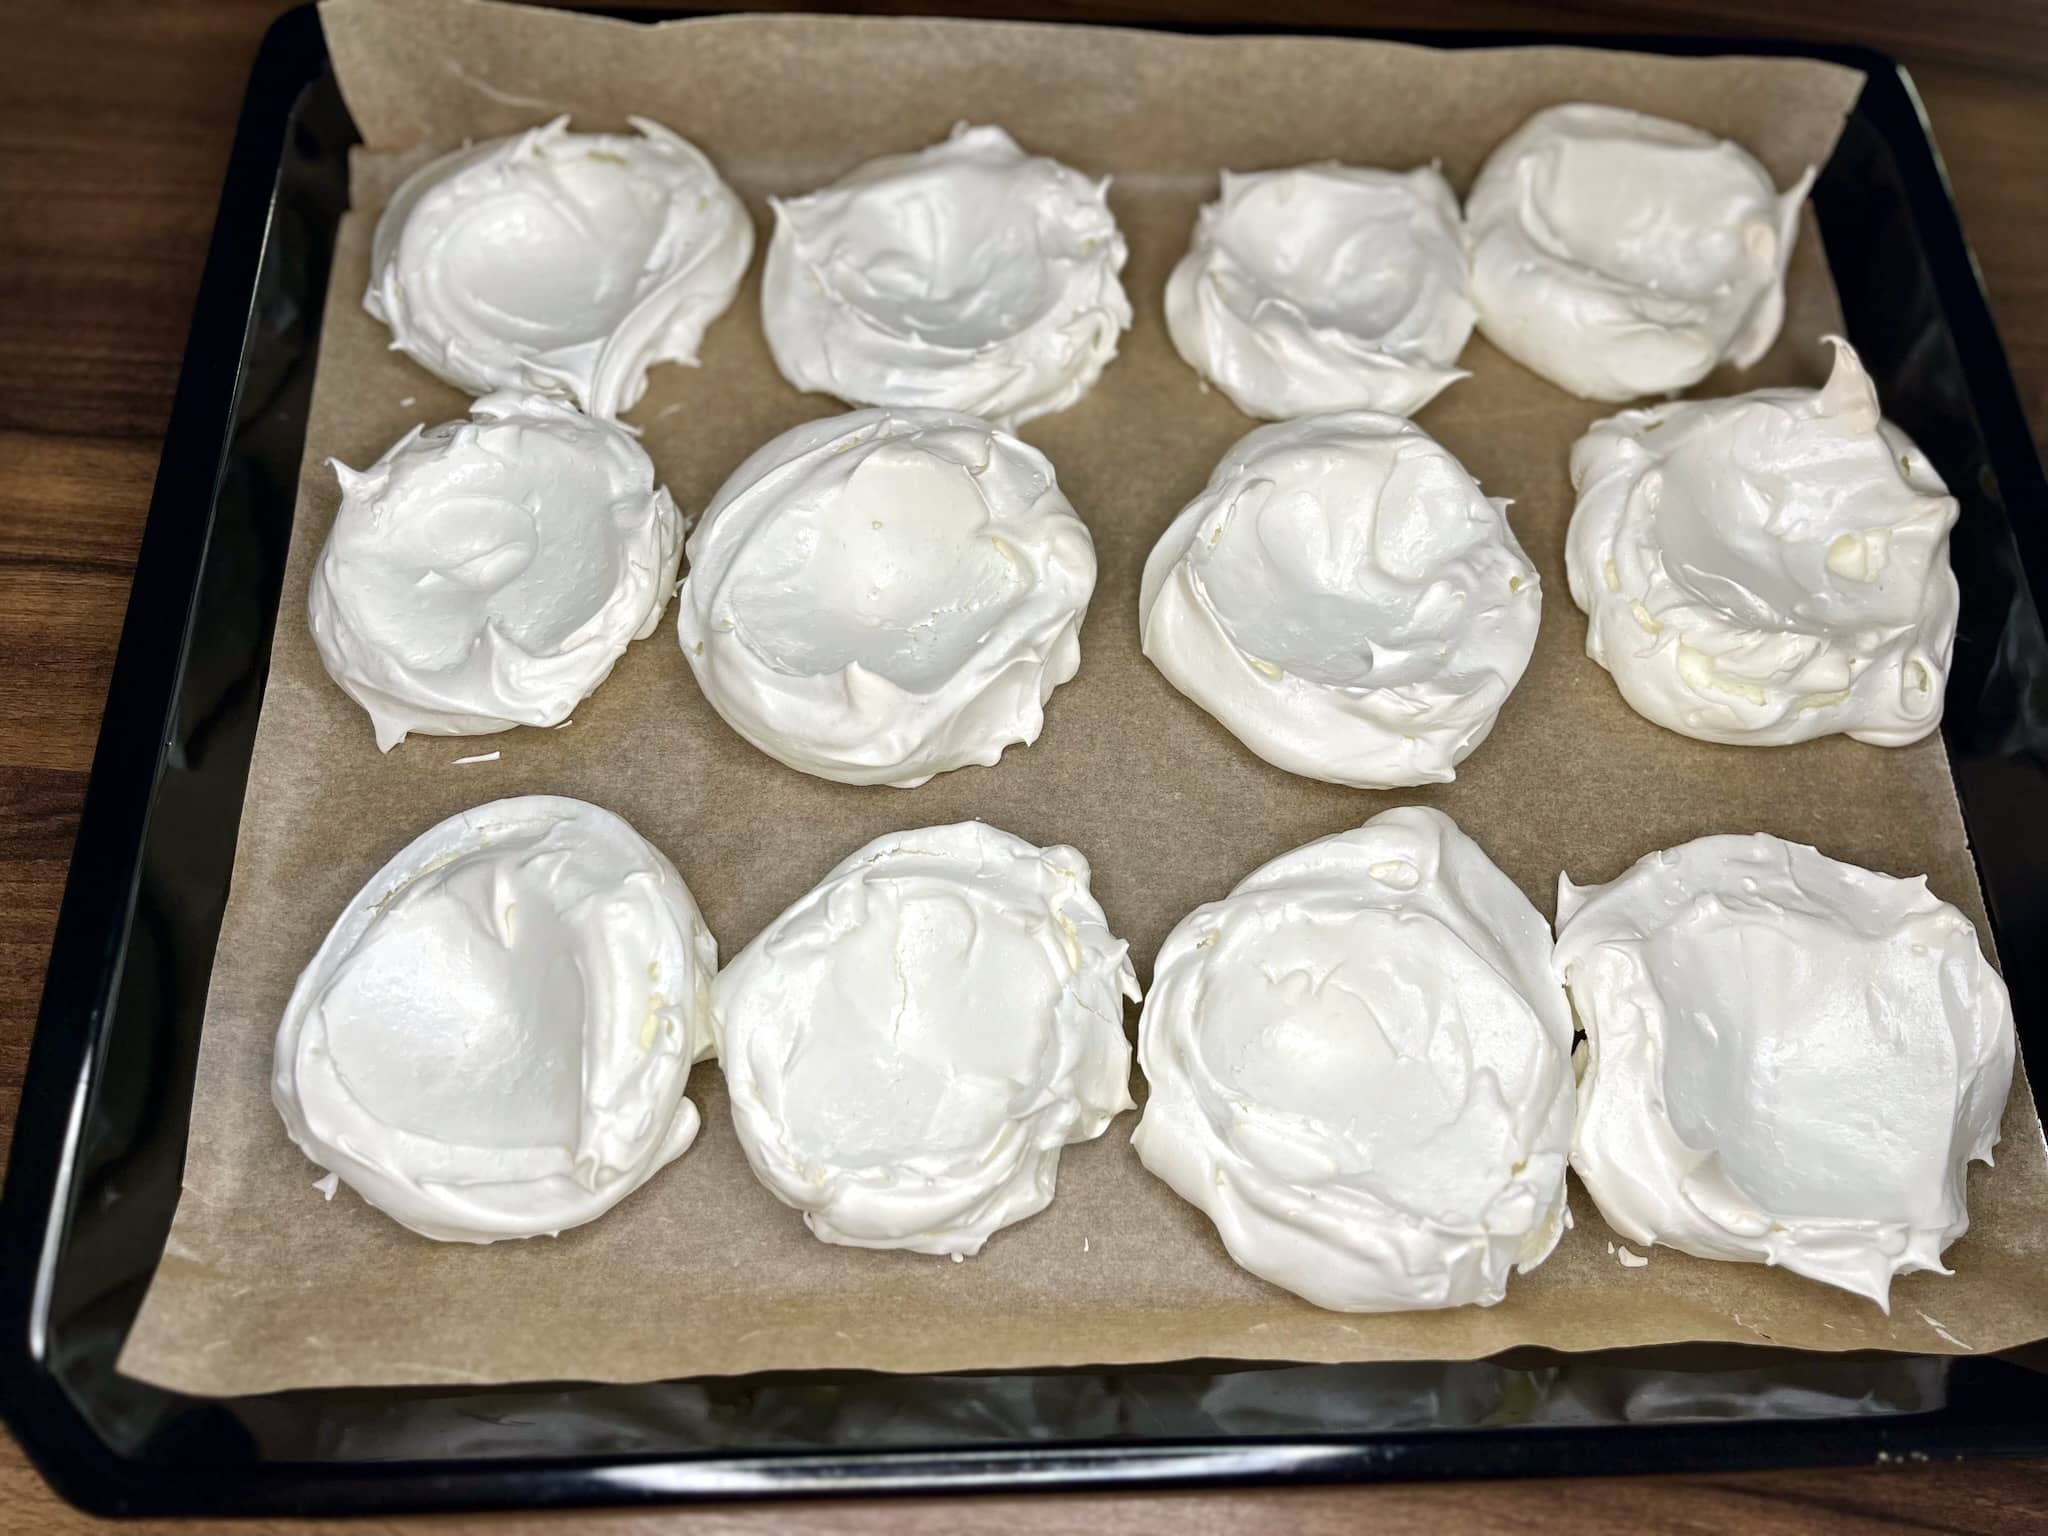 Nicely baked meringues on a baking tray